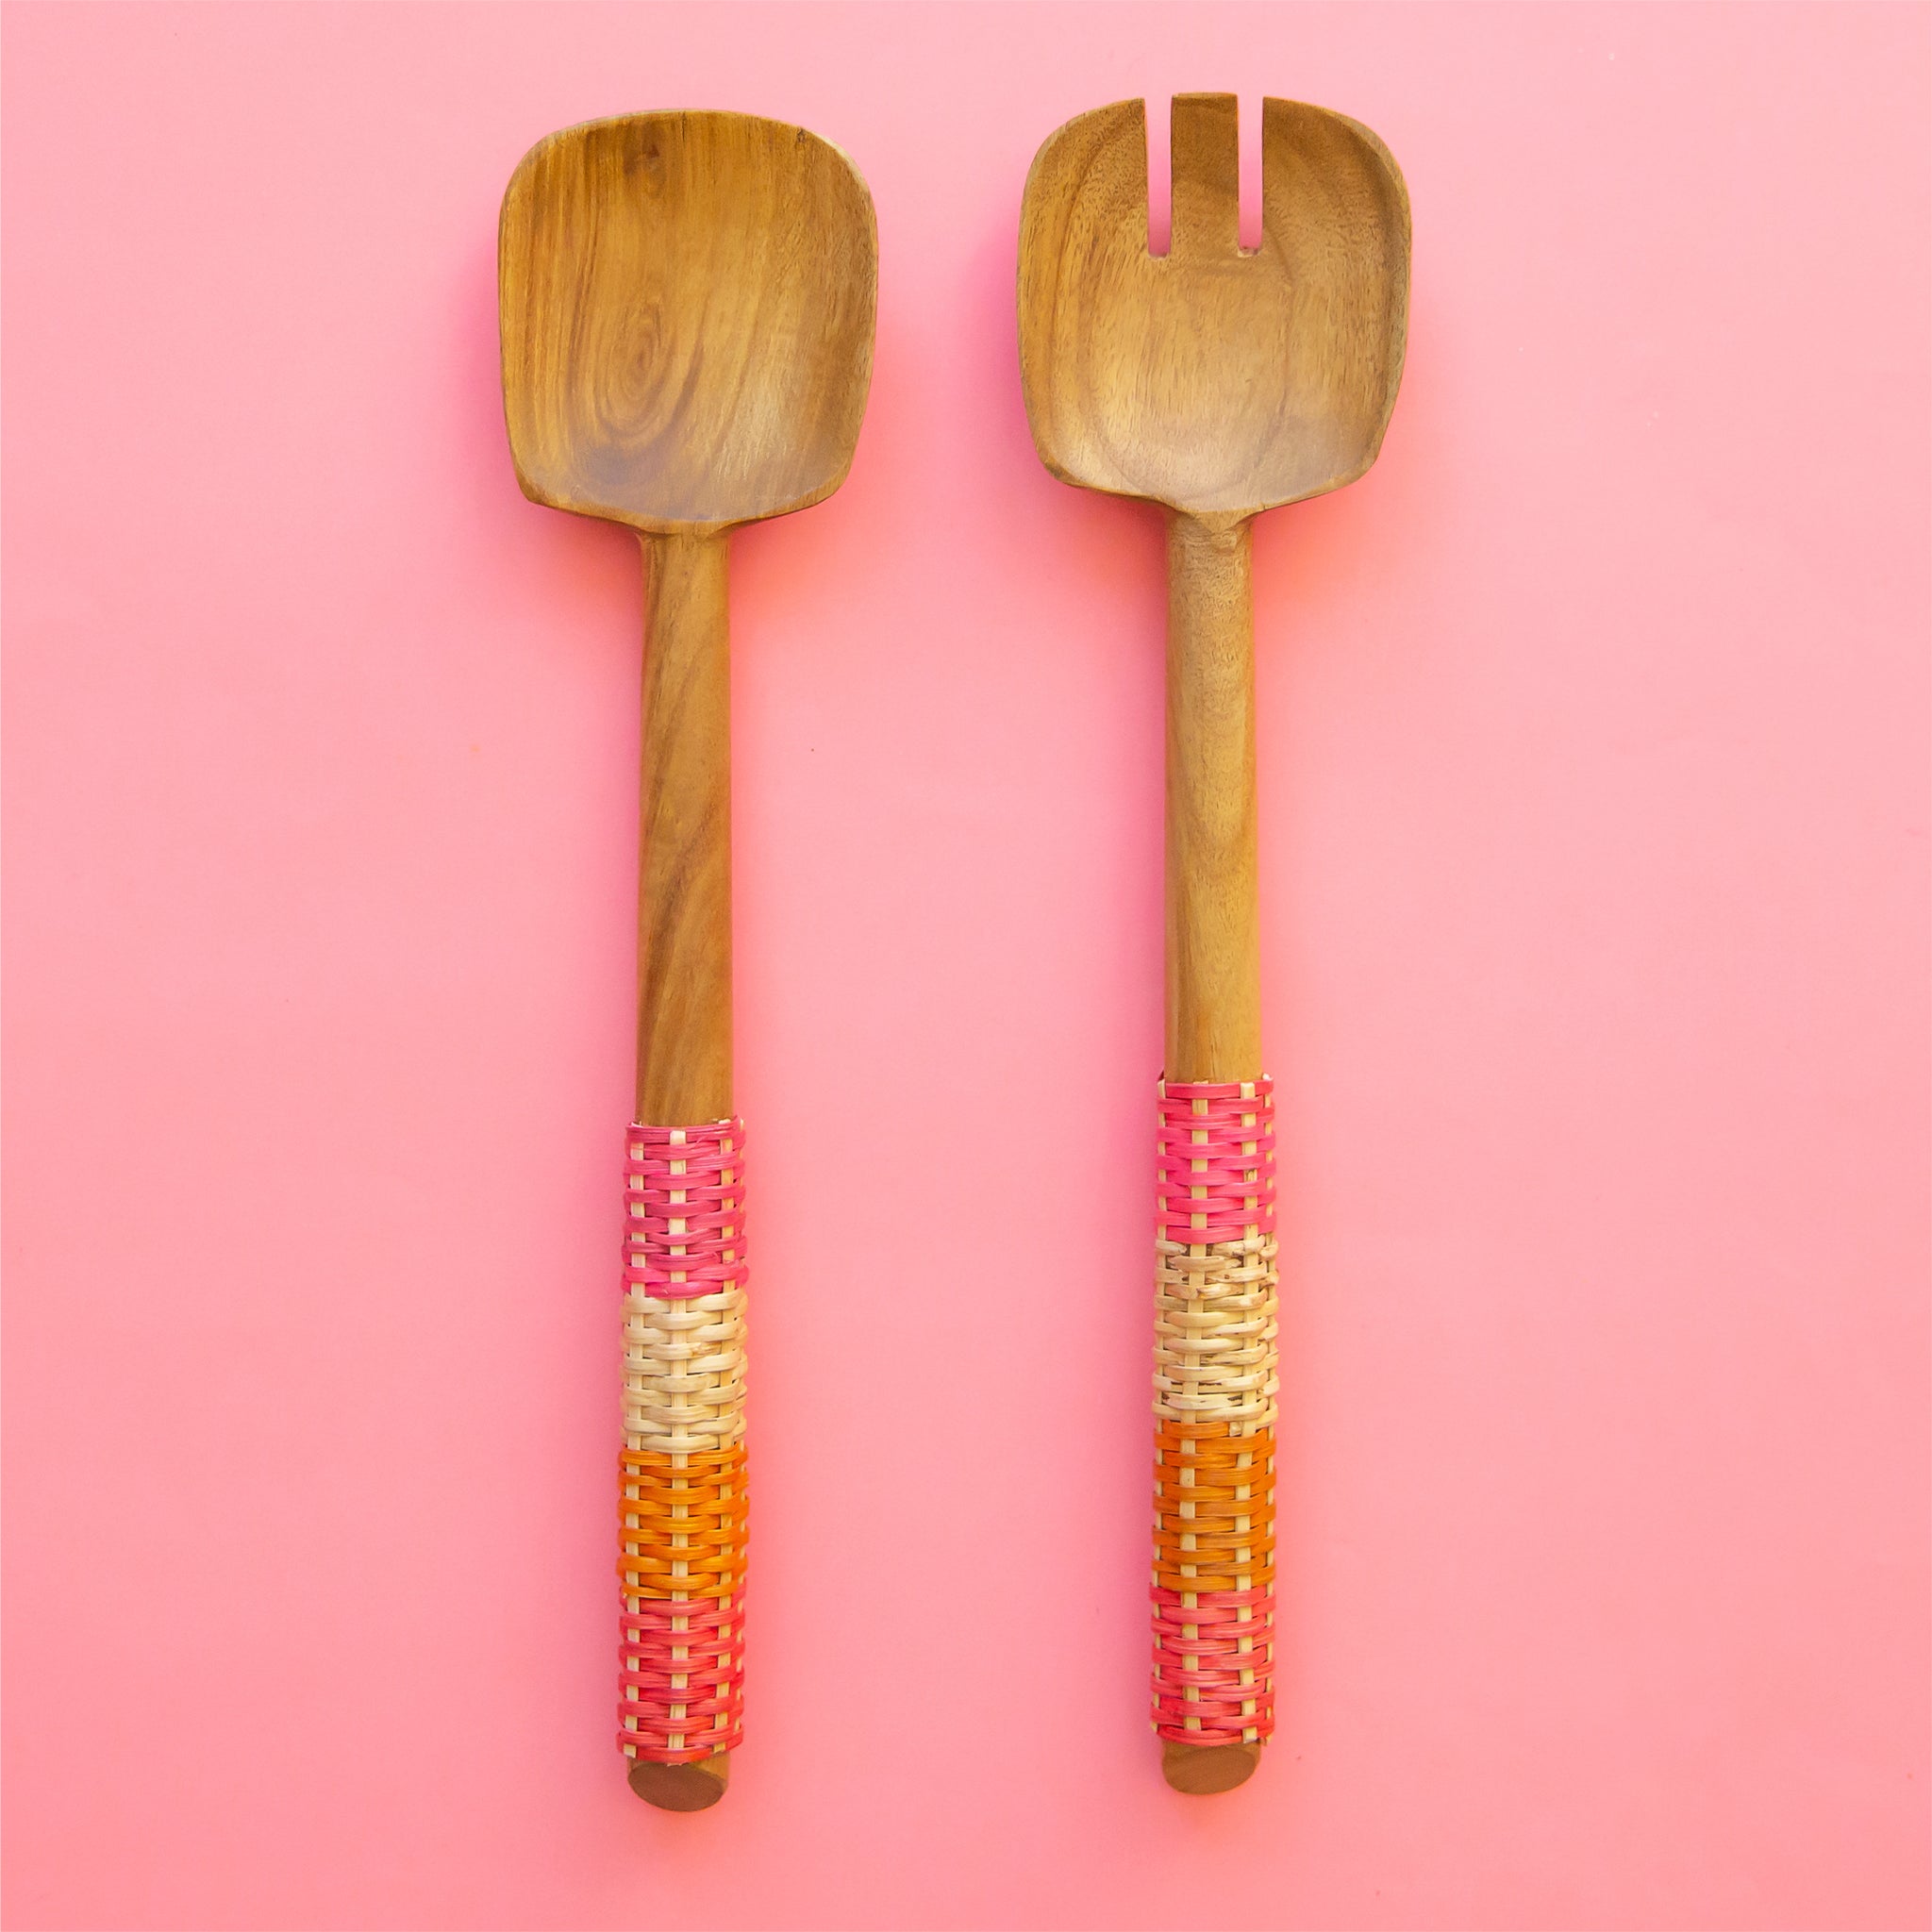 On a pink background is a pair of wooden salad servers with long handles wrapped in orange, pink and neutral colored rattan. 